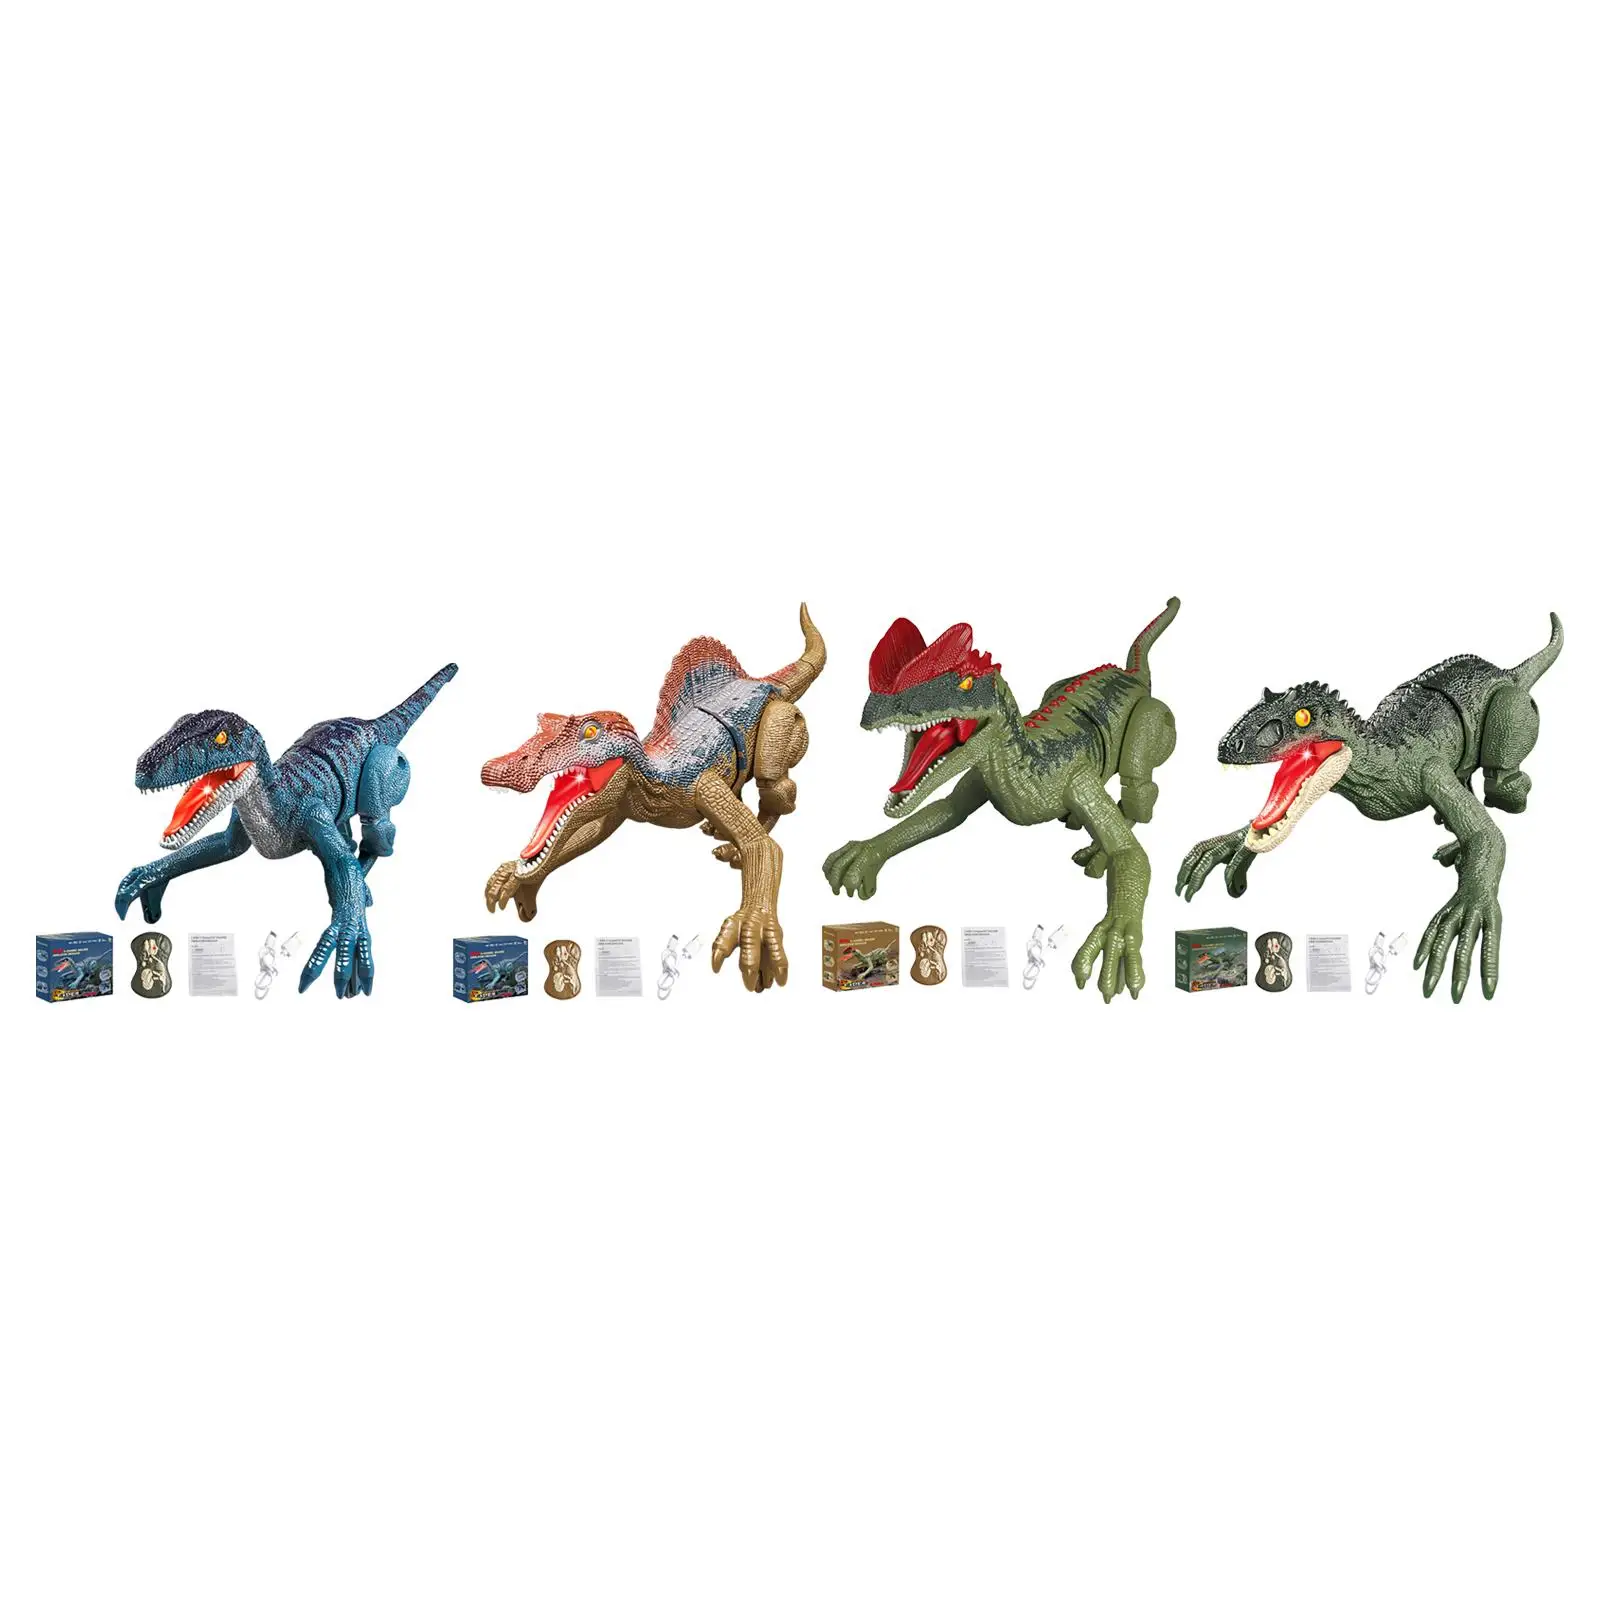 RC Dinosaur Toy Walking Dinosaur Toys Remote Control Dinosaur Toys Children Dinosaur Toys for Kids Toddlers Boys Holiday Gifts